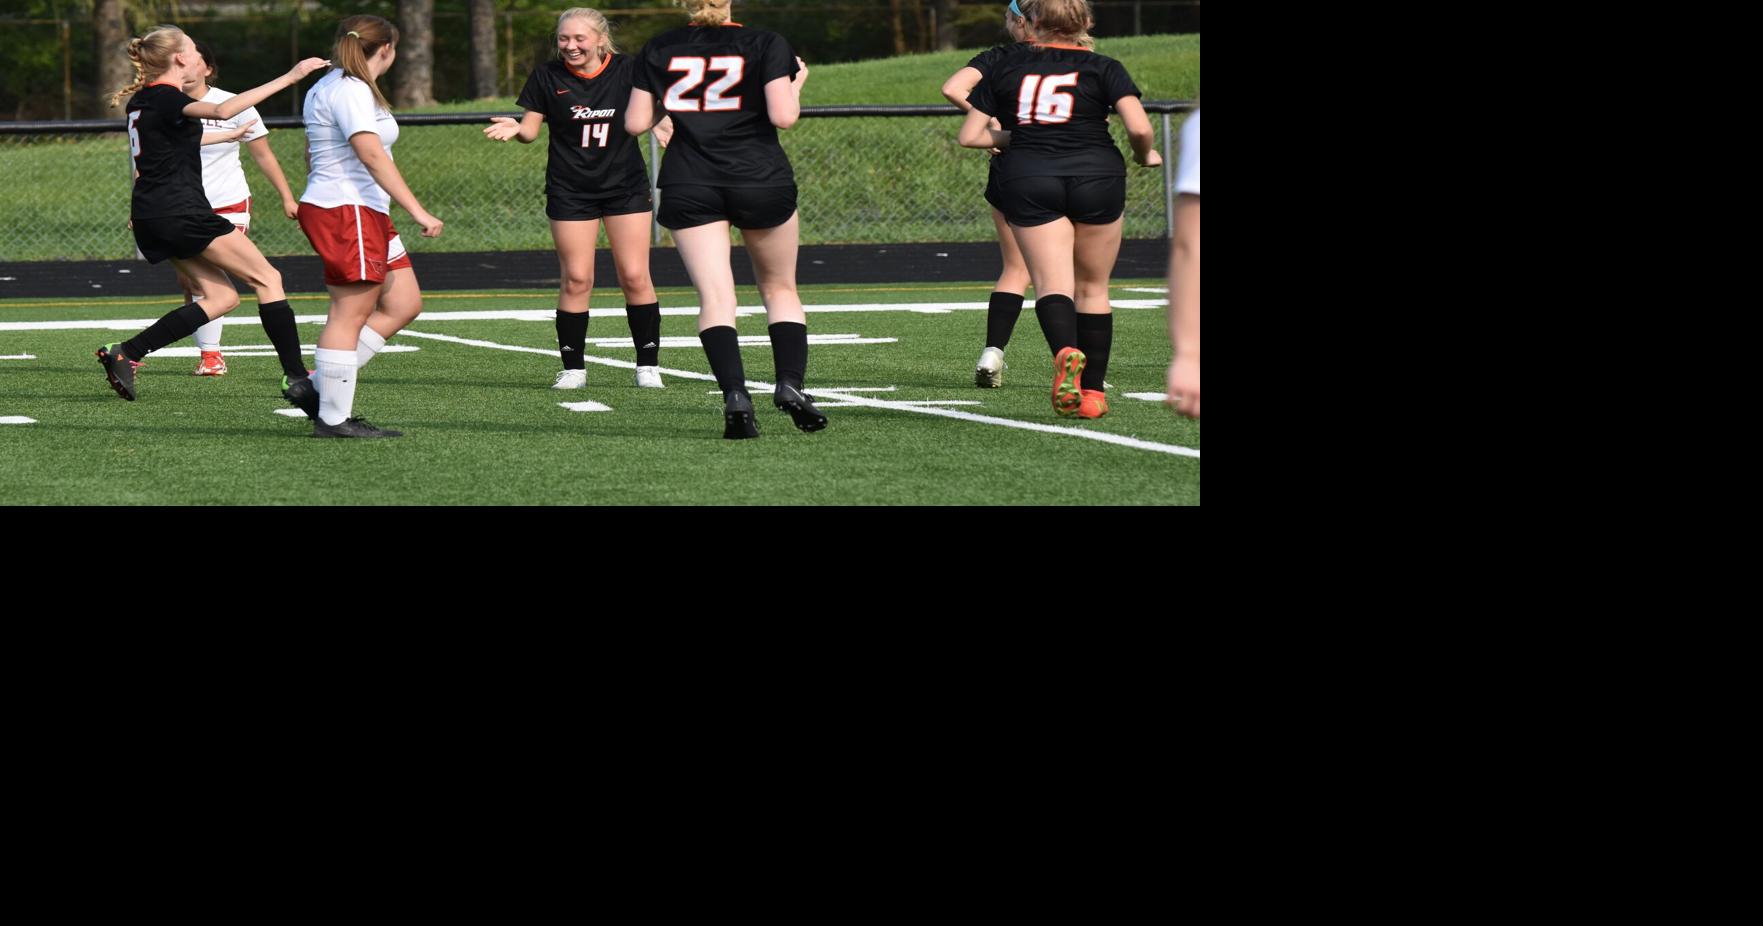 Ripon Tiger girls’ soccer team unable to generate offense in loss to Waupun; defeats Mayville 4-1 | Sports